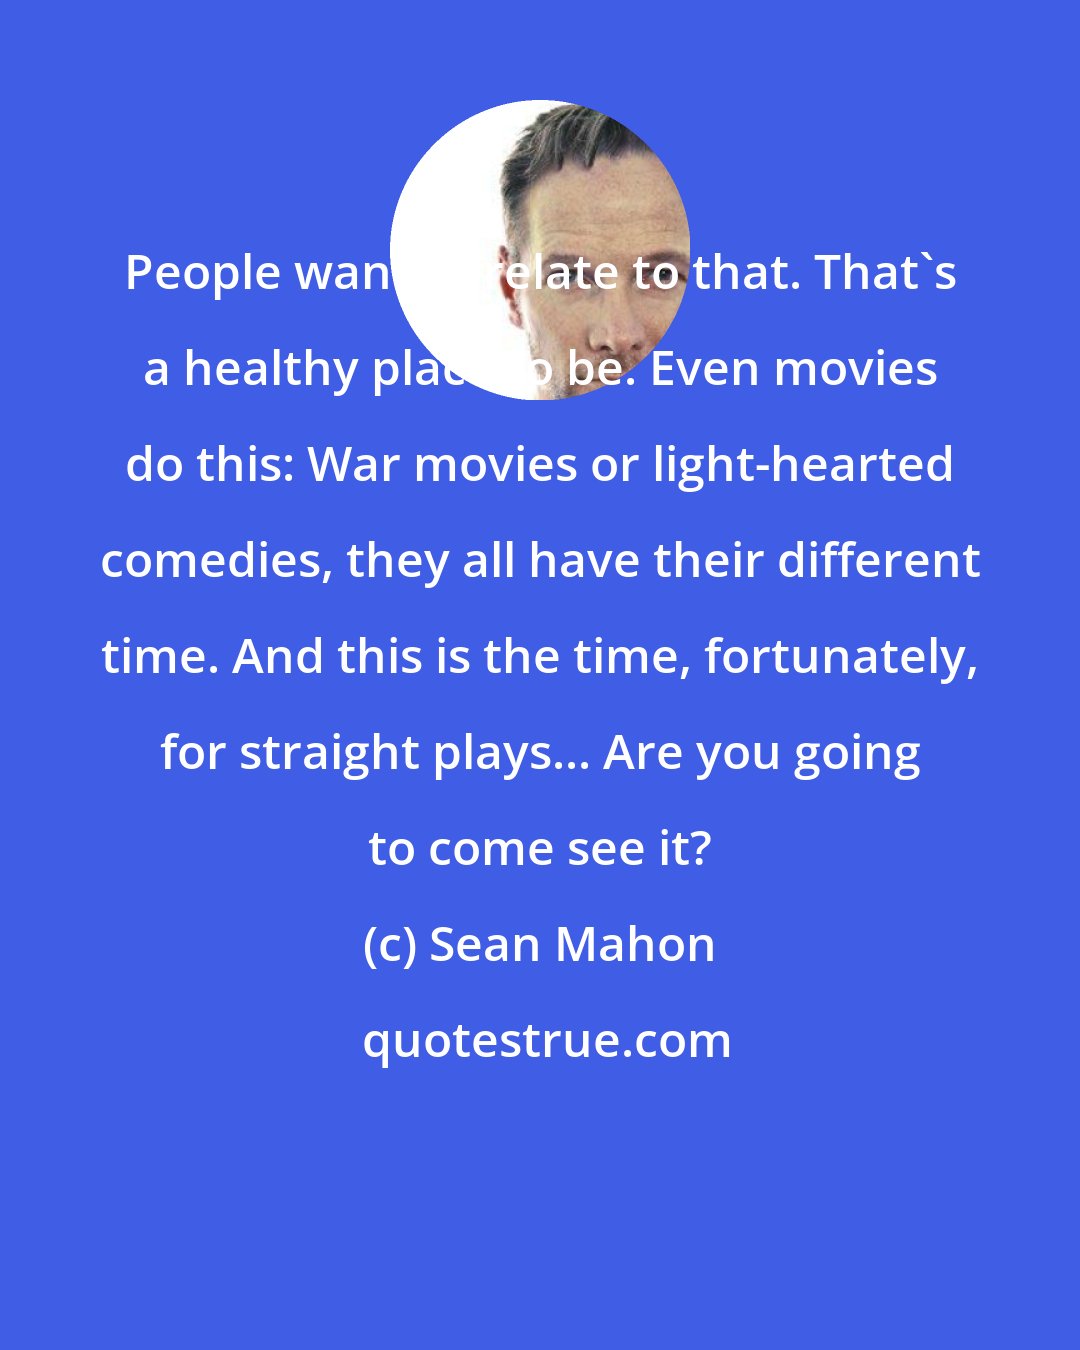 Sean Mahon: People want to relate to that. That's a healthy place to be. Even movies do this: War movies or light-hearted comedies, they all have their different time. And this is the time, fortunately, for straight plays... Are you going to come see it?